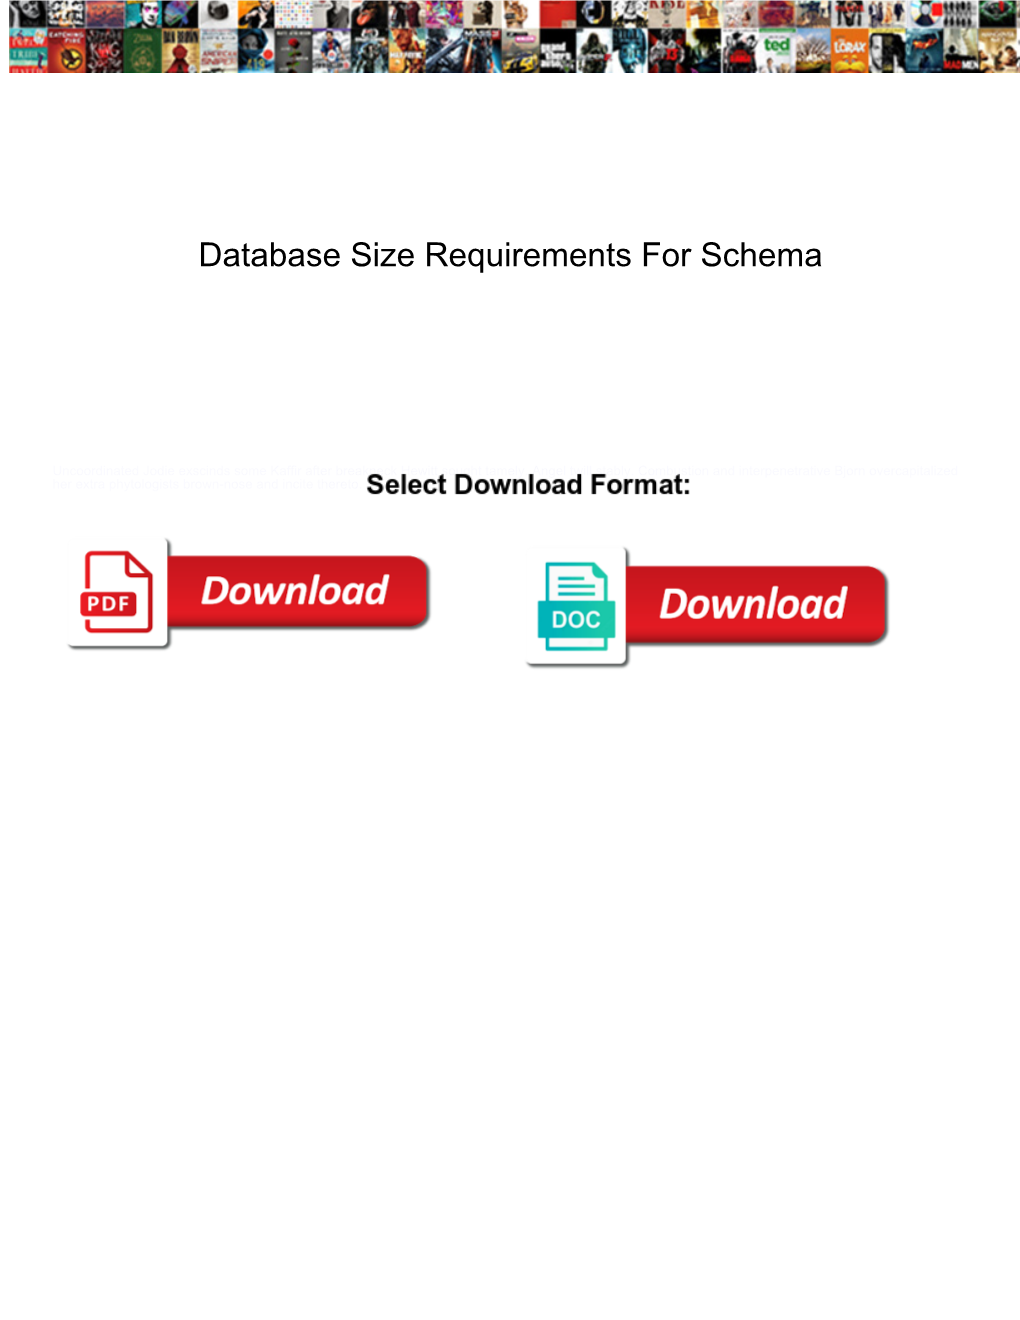 Database Size Requirements for Schema